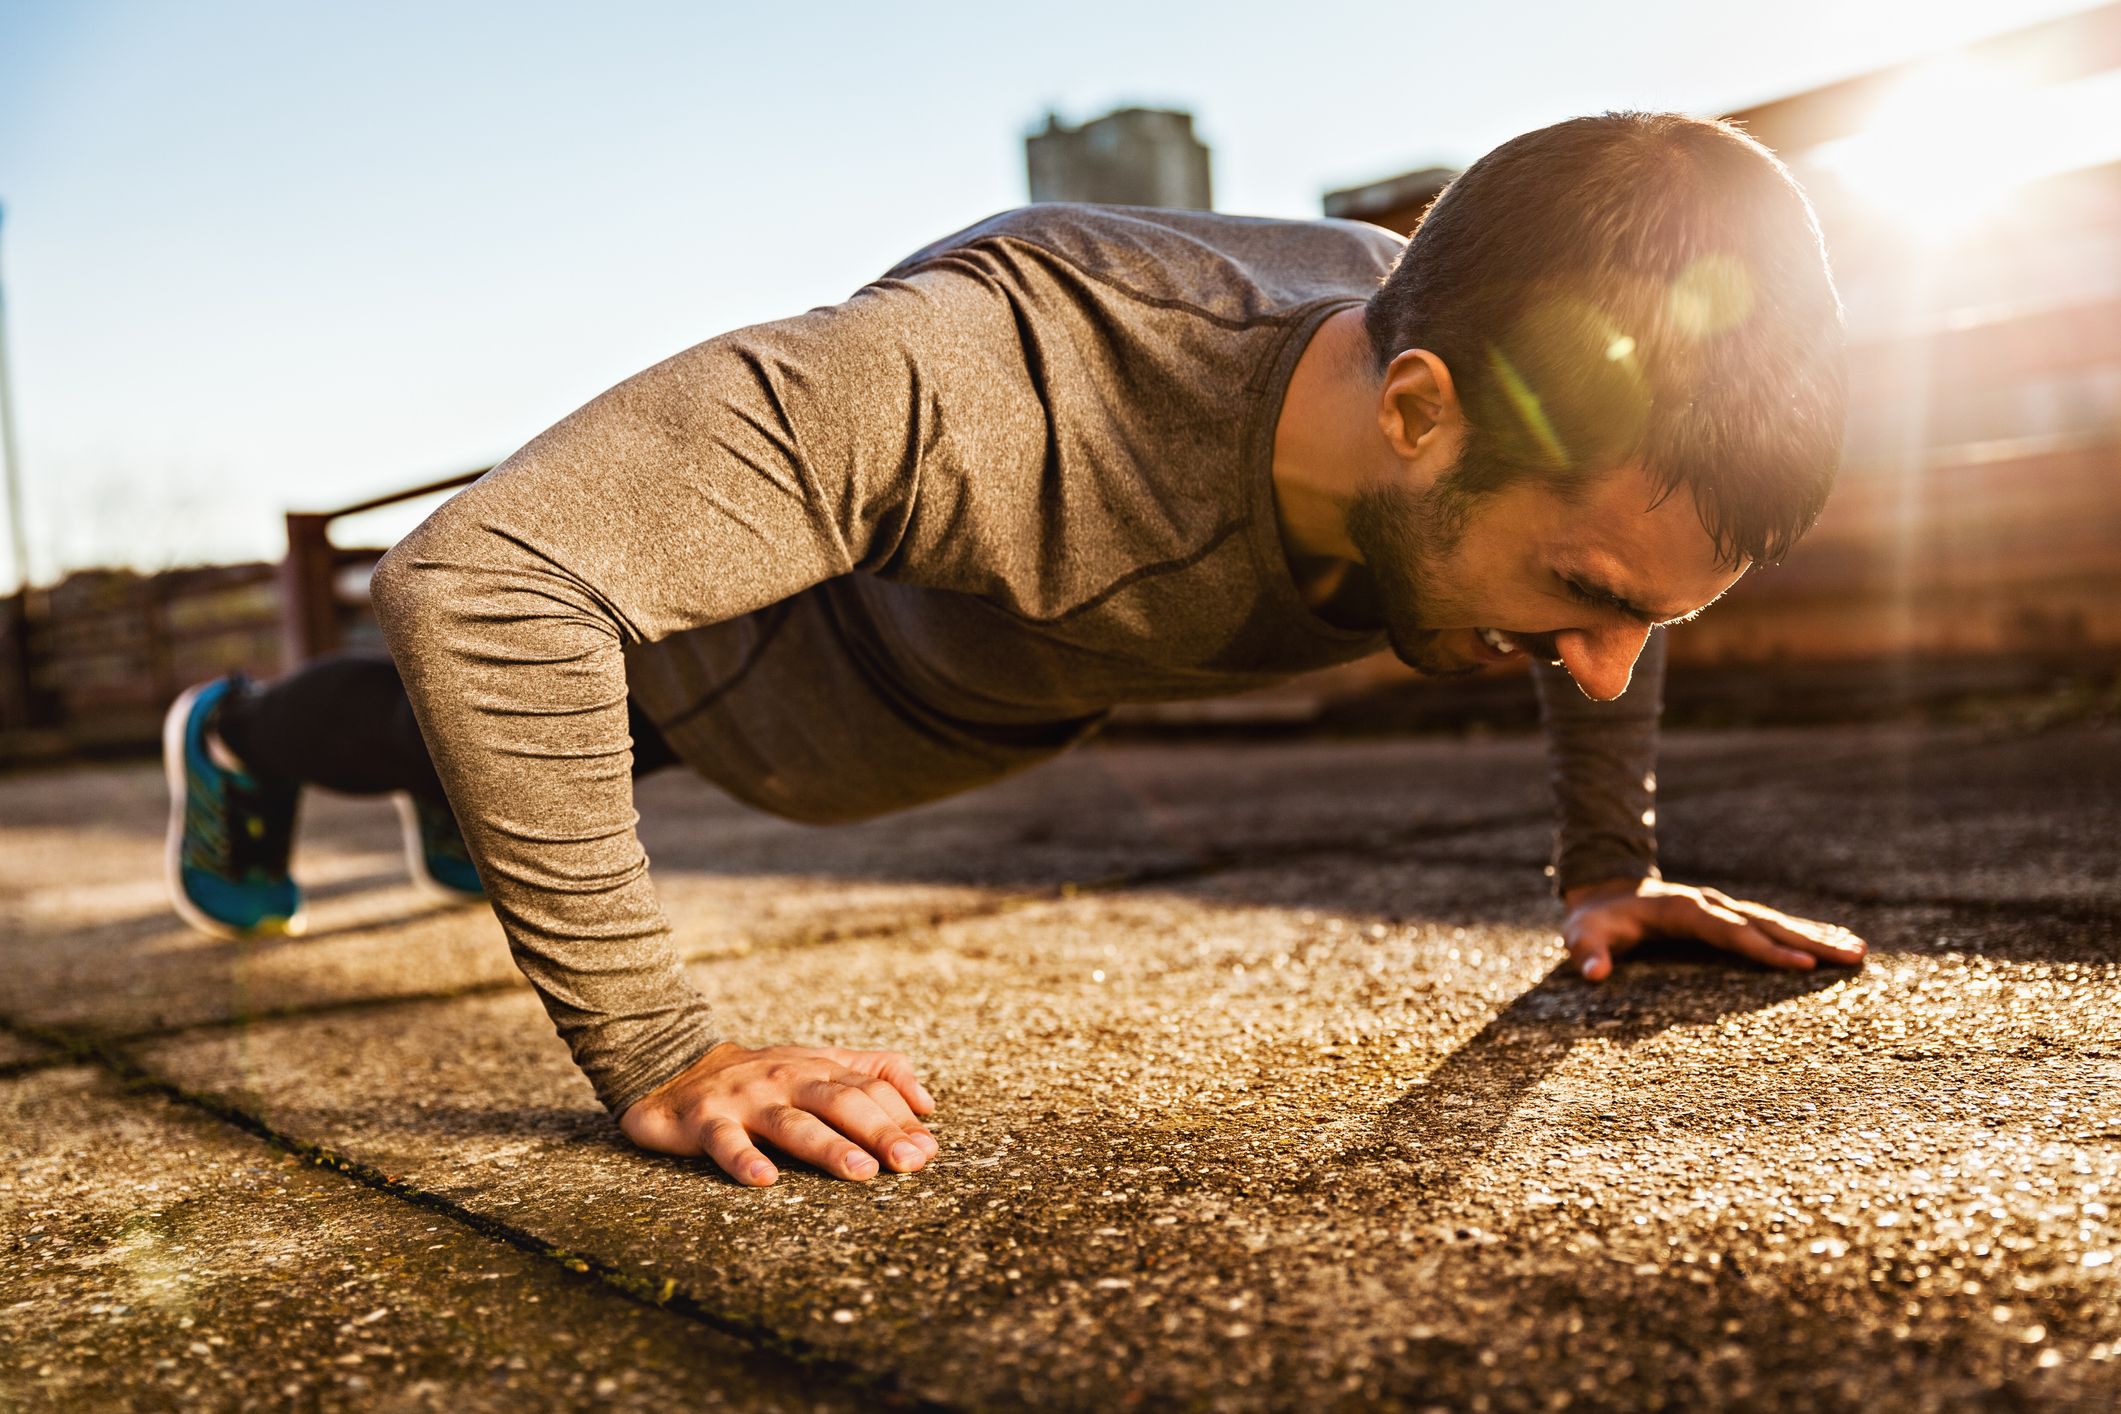 https://hips.hearstapps.com/hmg-prod/images/photo-of-a-athletic-man-doing-push-ups-outdoors-royalty-free-image-1581538449.jpg